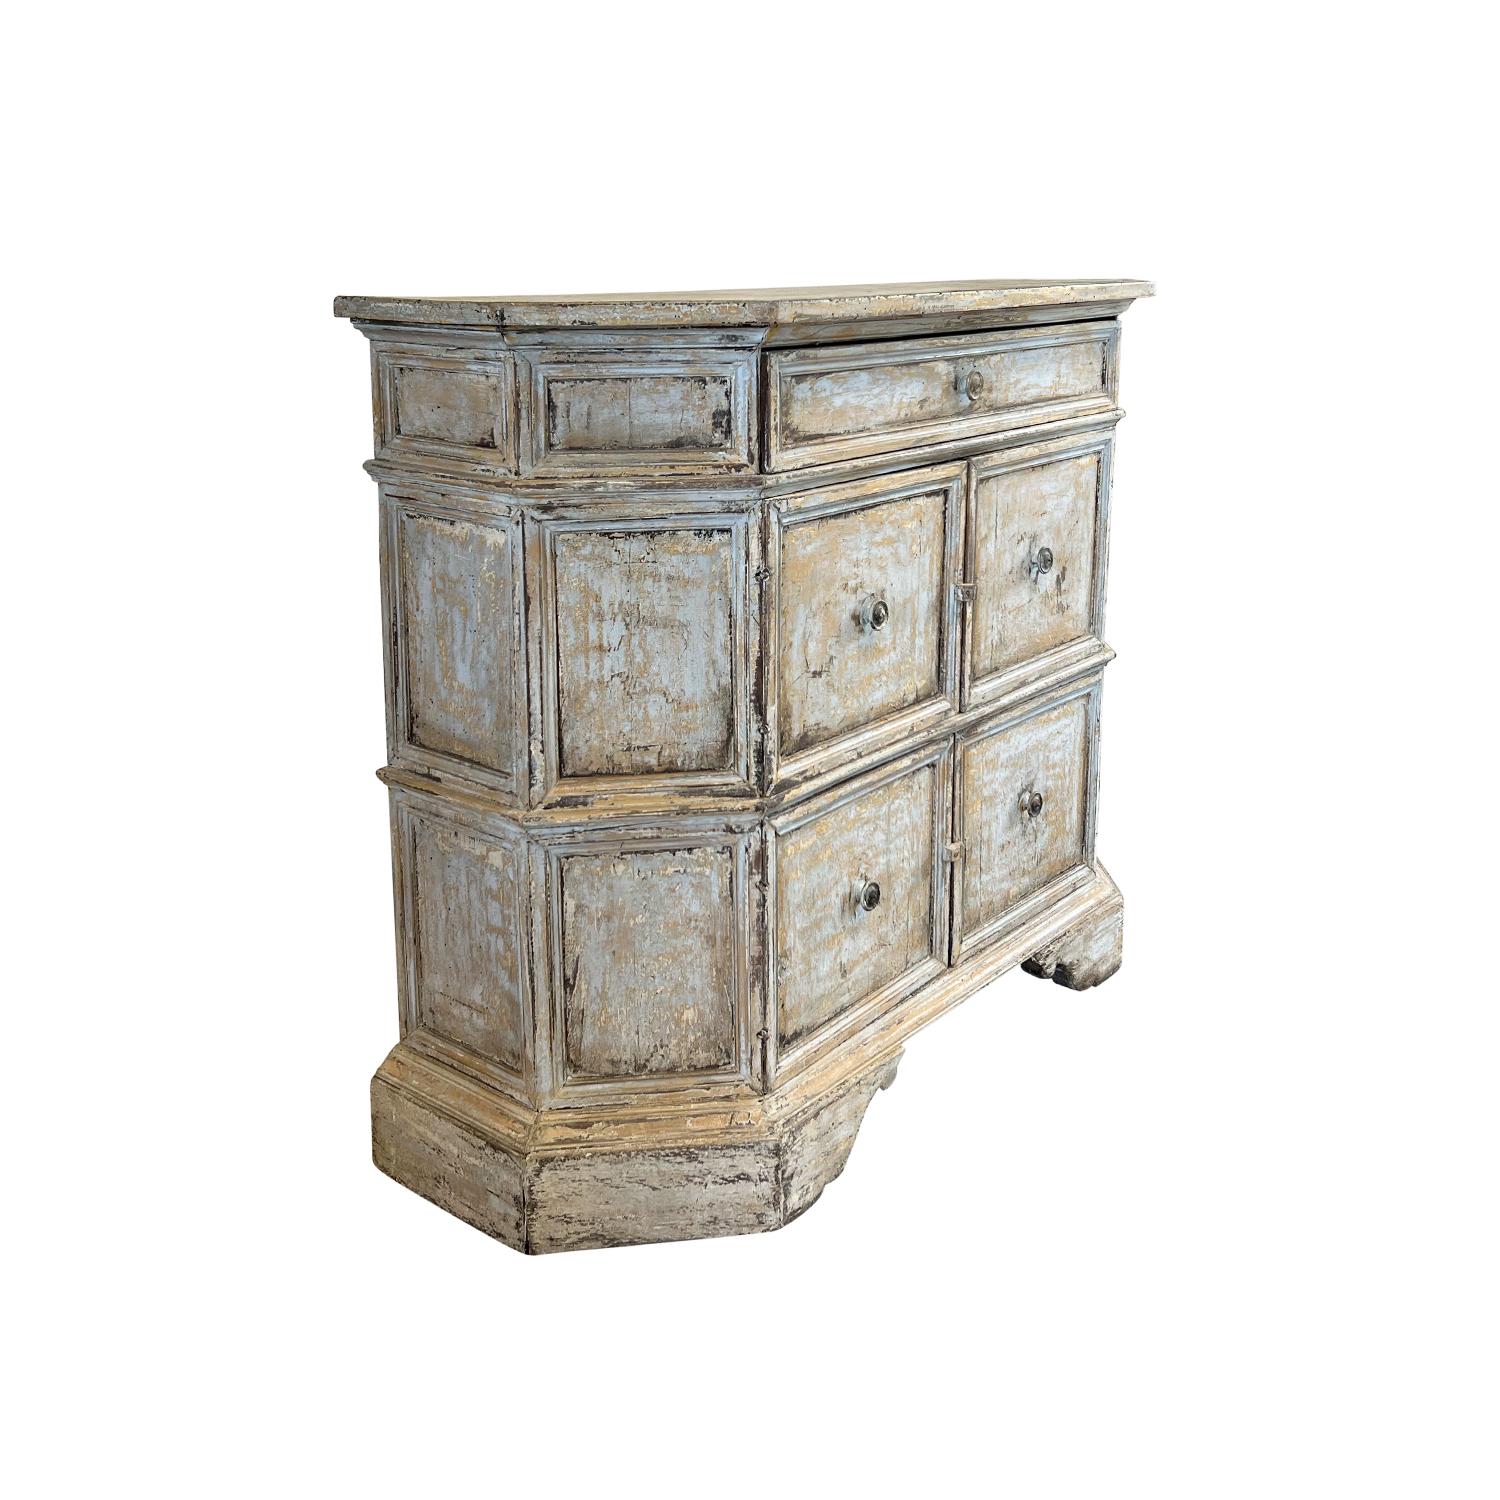 An early 19th Century Italian commode made of hand crafted painted Pinewood, in good condition. The single Arte Povera raised cabinet, credenza is composed with four door panels and one large drawer on the top, supported by an arched wooden frame,